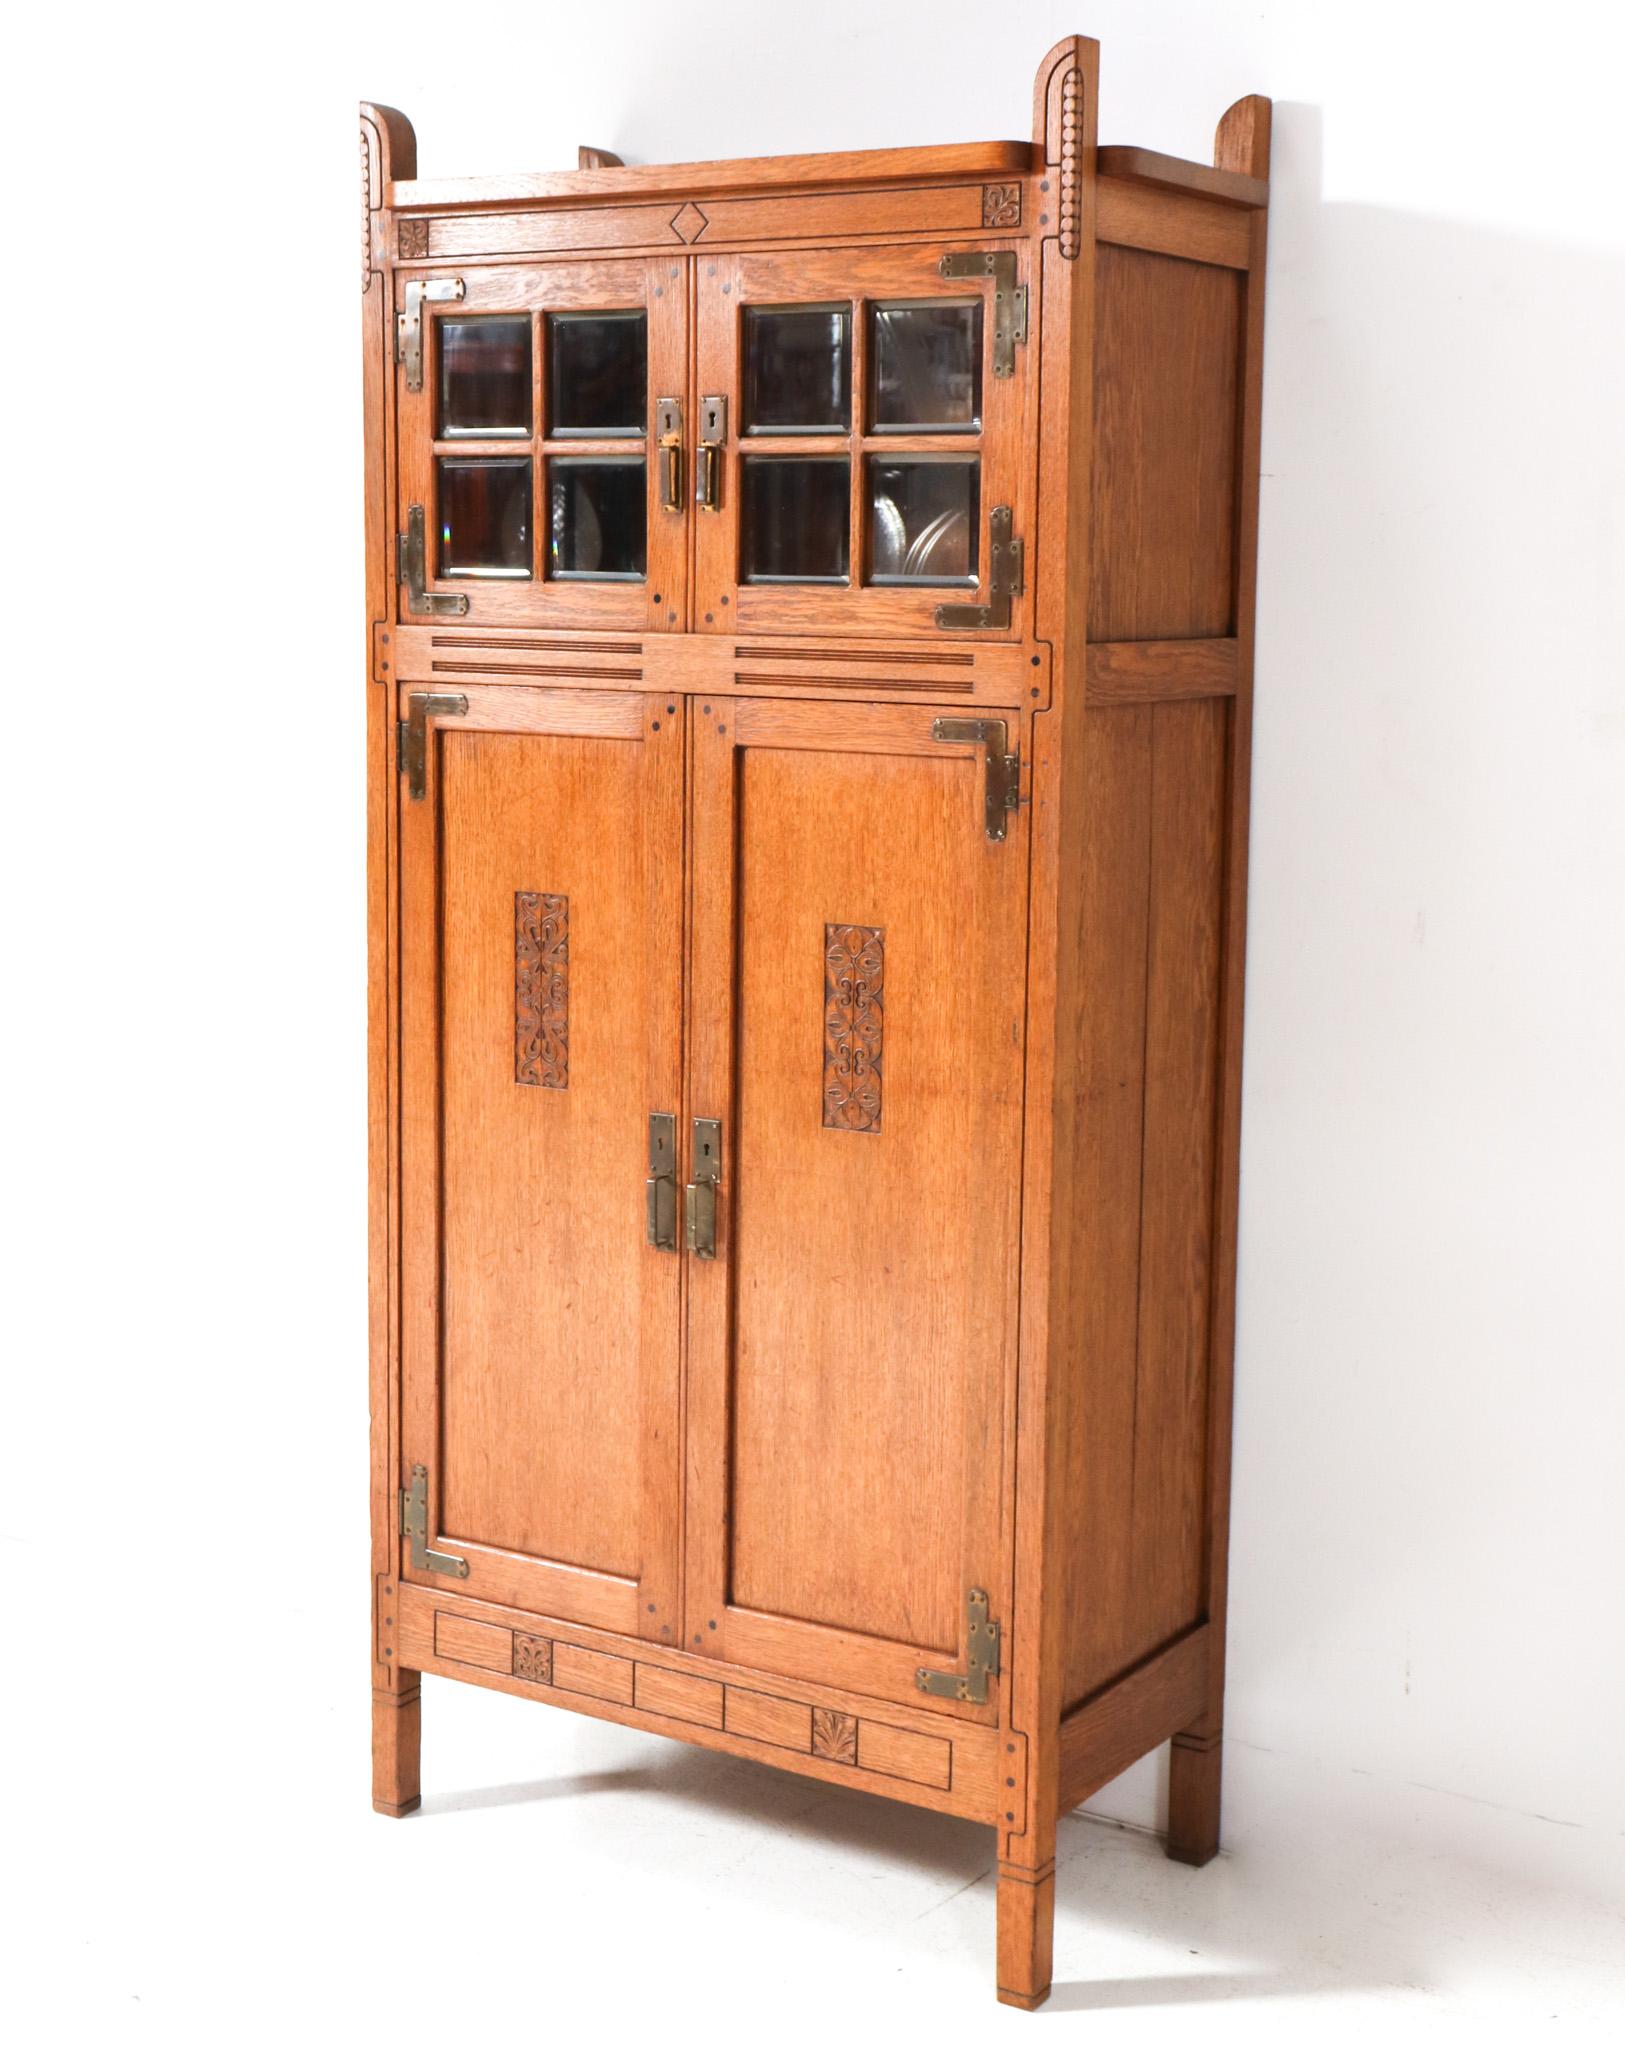 Magnificent and ultra rare Arts & Crafts bookcase.
Design by Willem Penaat for Fa. Haag & Zn Amsterdam.
Striking Dutch design from 1897.
Solid oak frame with original patinated brass handles on the four doors.
The eight patinated brass hinges are